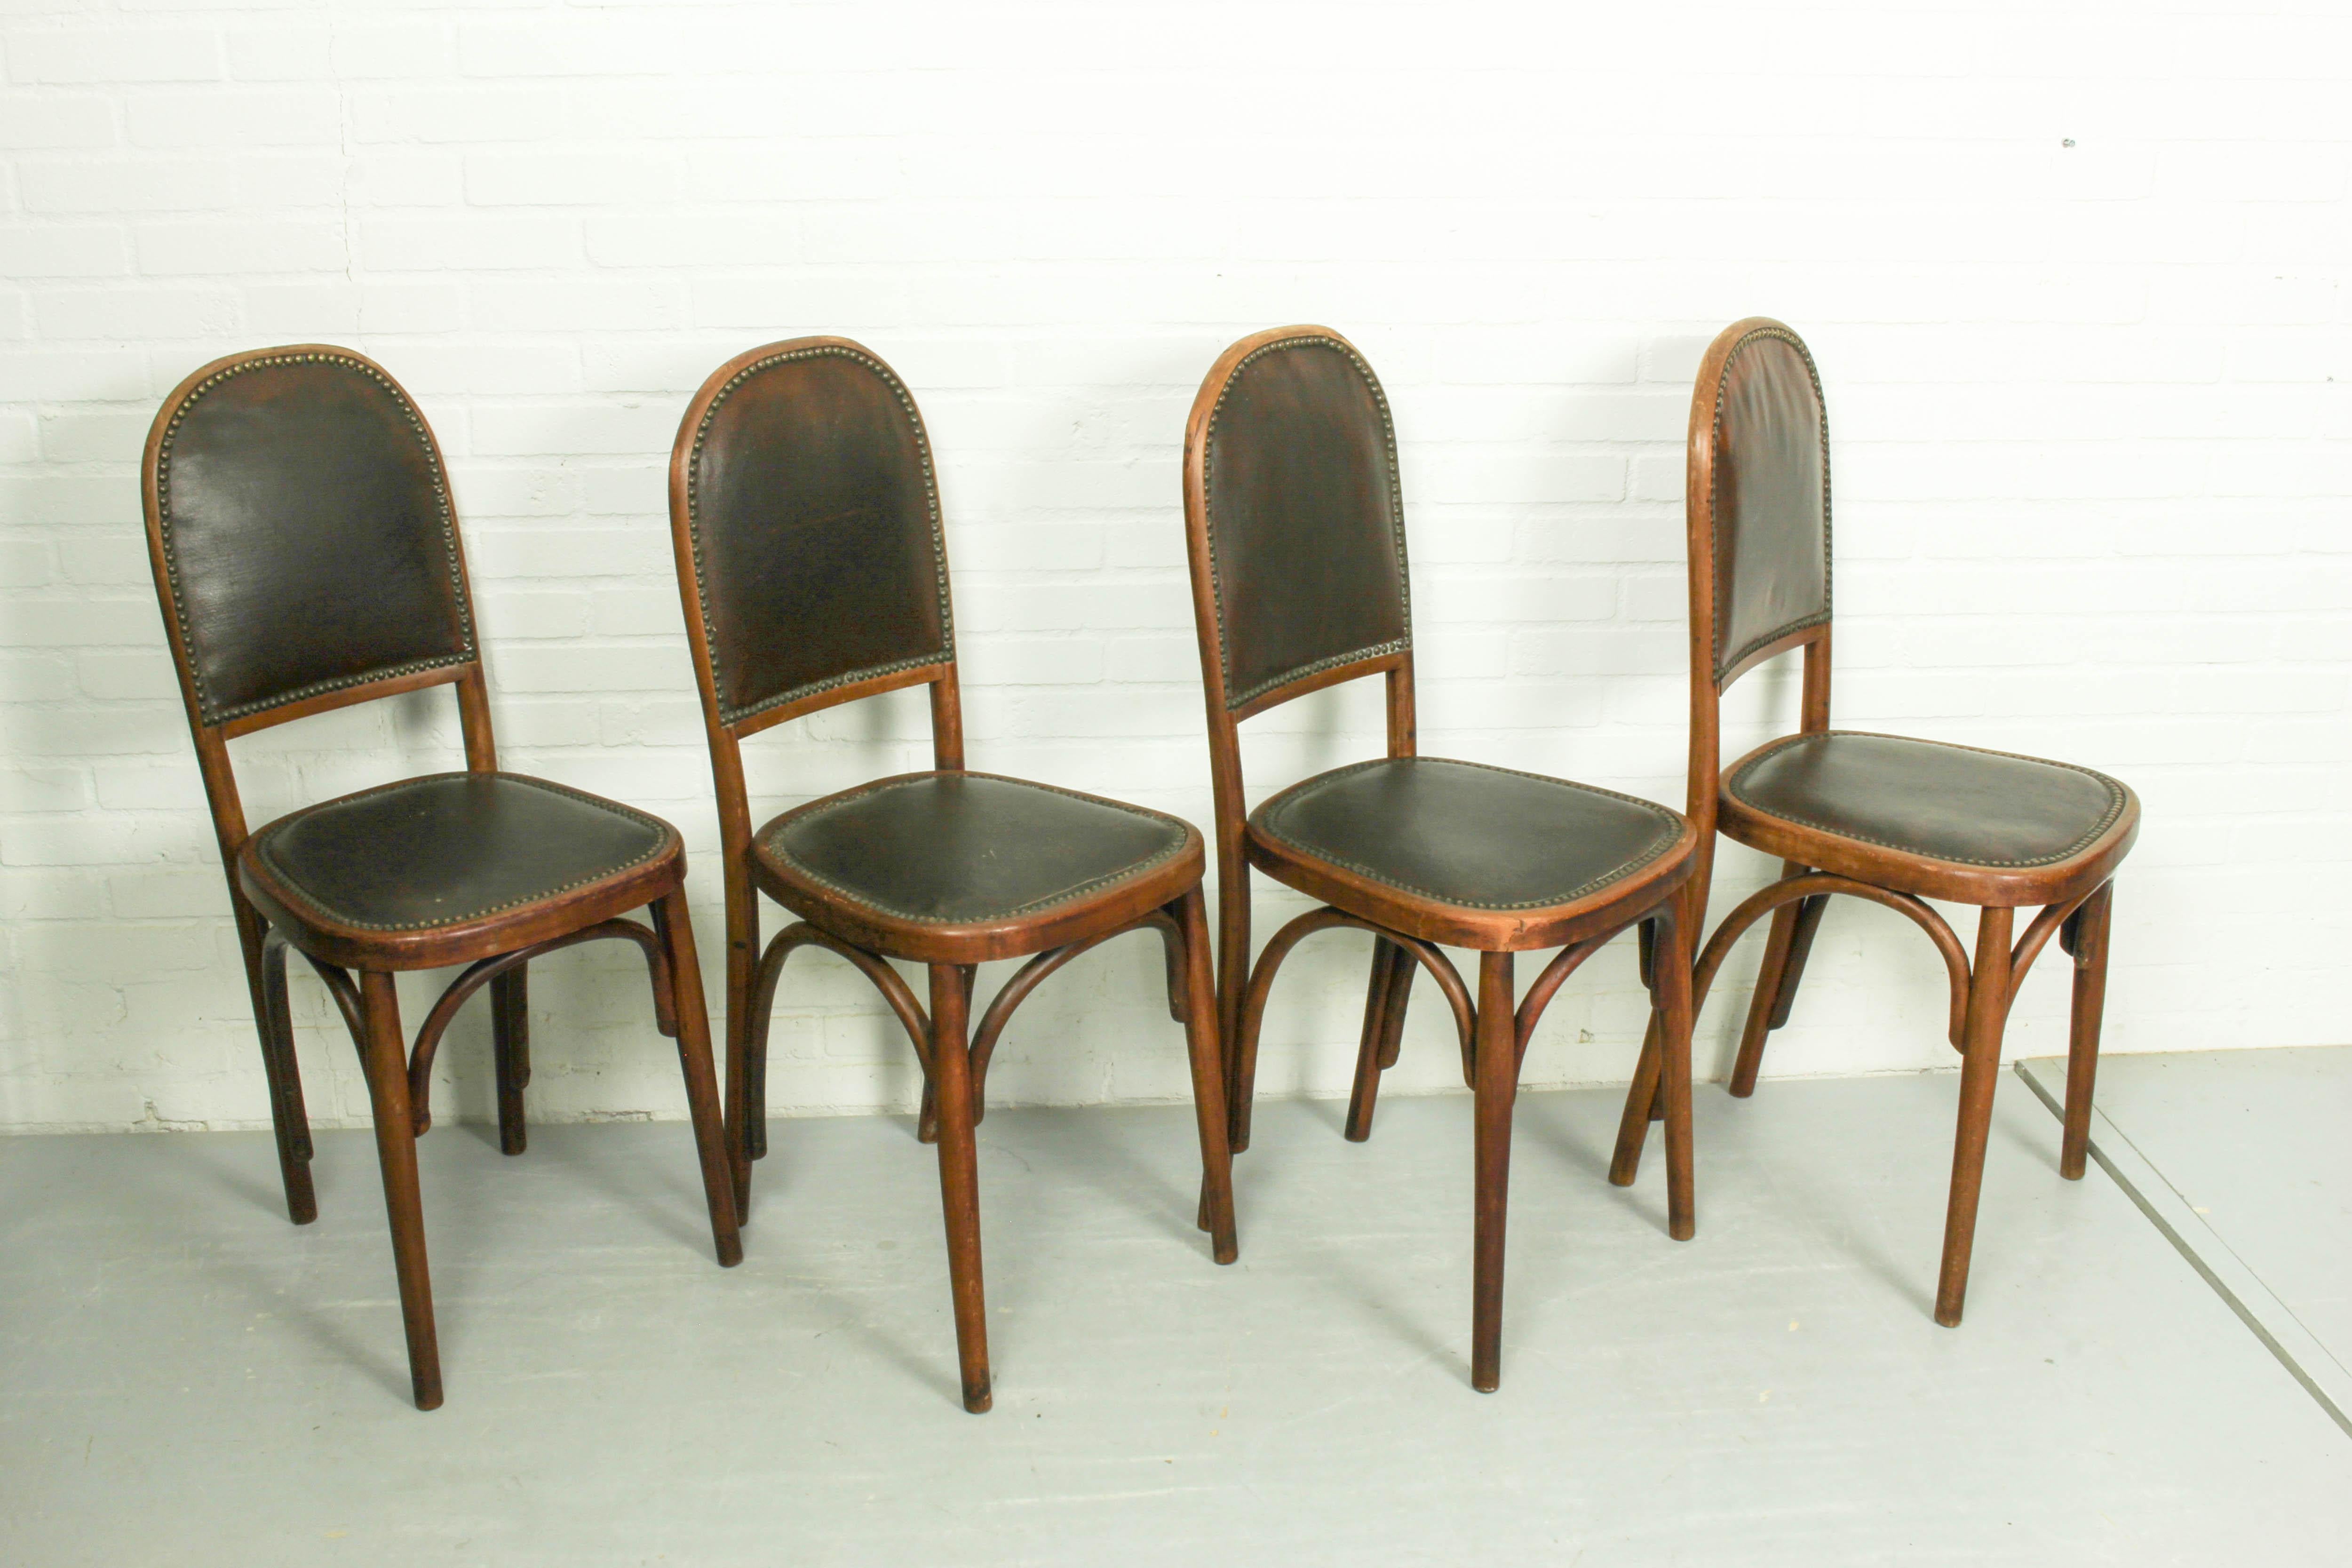 Superb and very rare dining room set of 4 chairs. Made by Fischel, circa 1905-1910.Fischel is with Thonet, Kohn and Mundus one of the leading manufacturers of bentwood furniture. In good vintage condition, everything is stabile.The leather seems to